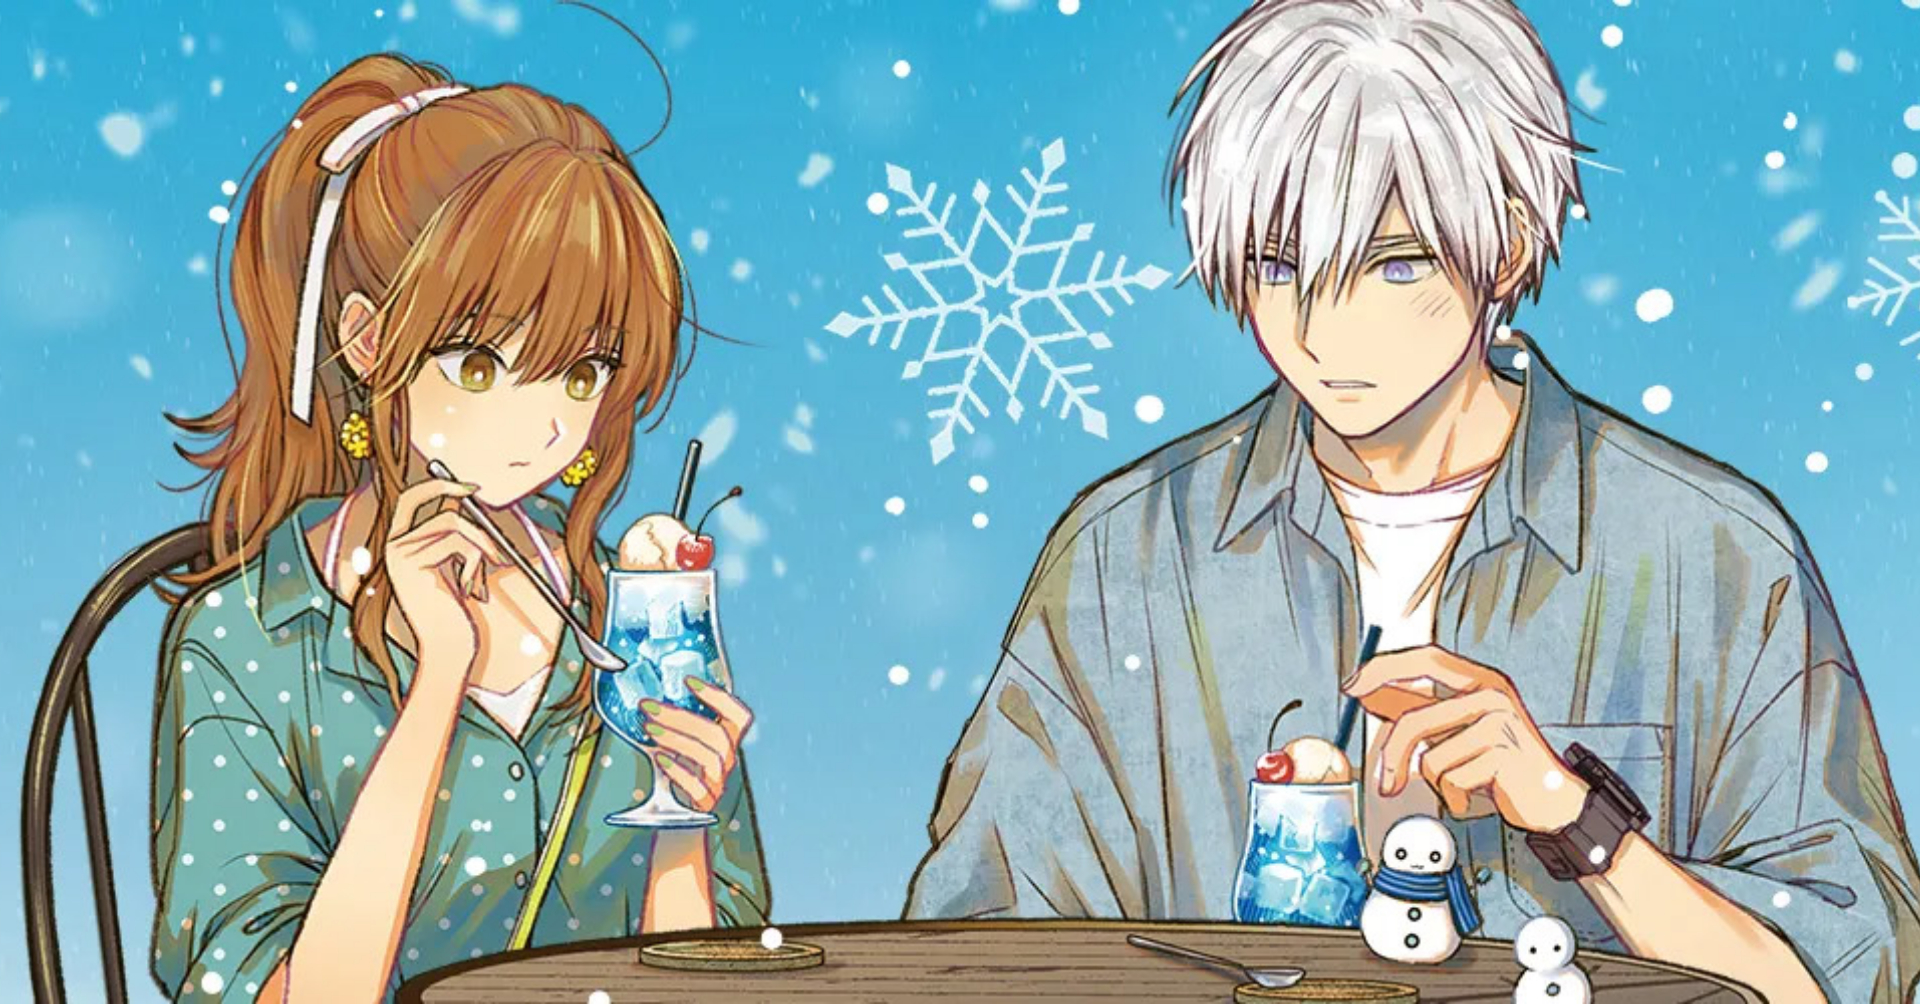 The Ice Guy and His Cool Female Colleague TV Anime Announced - Anime Corner